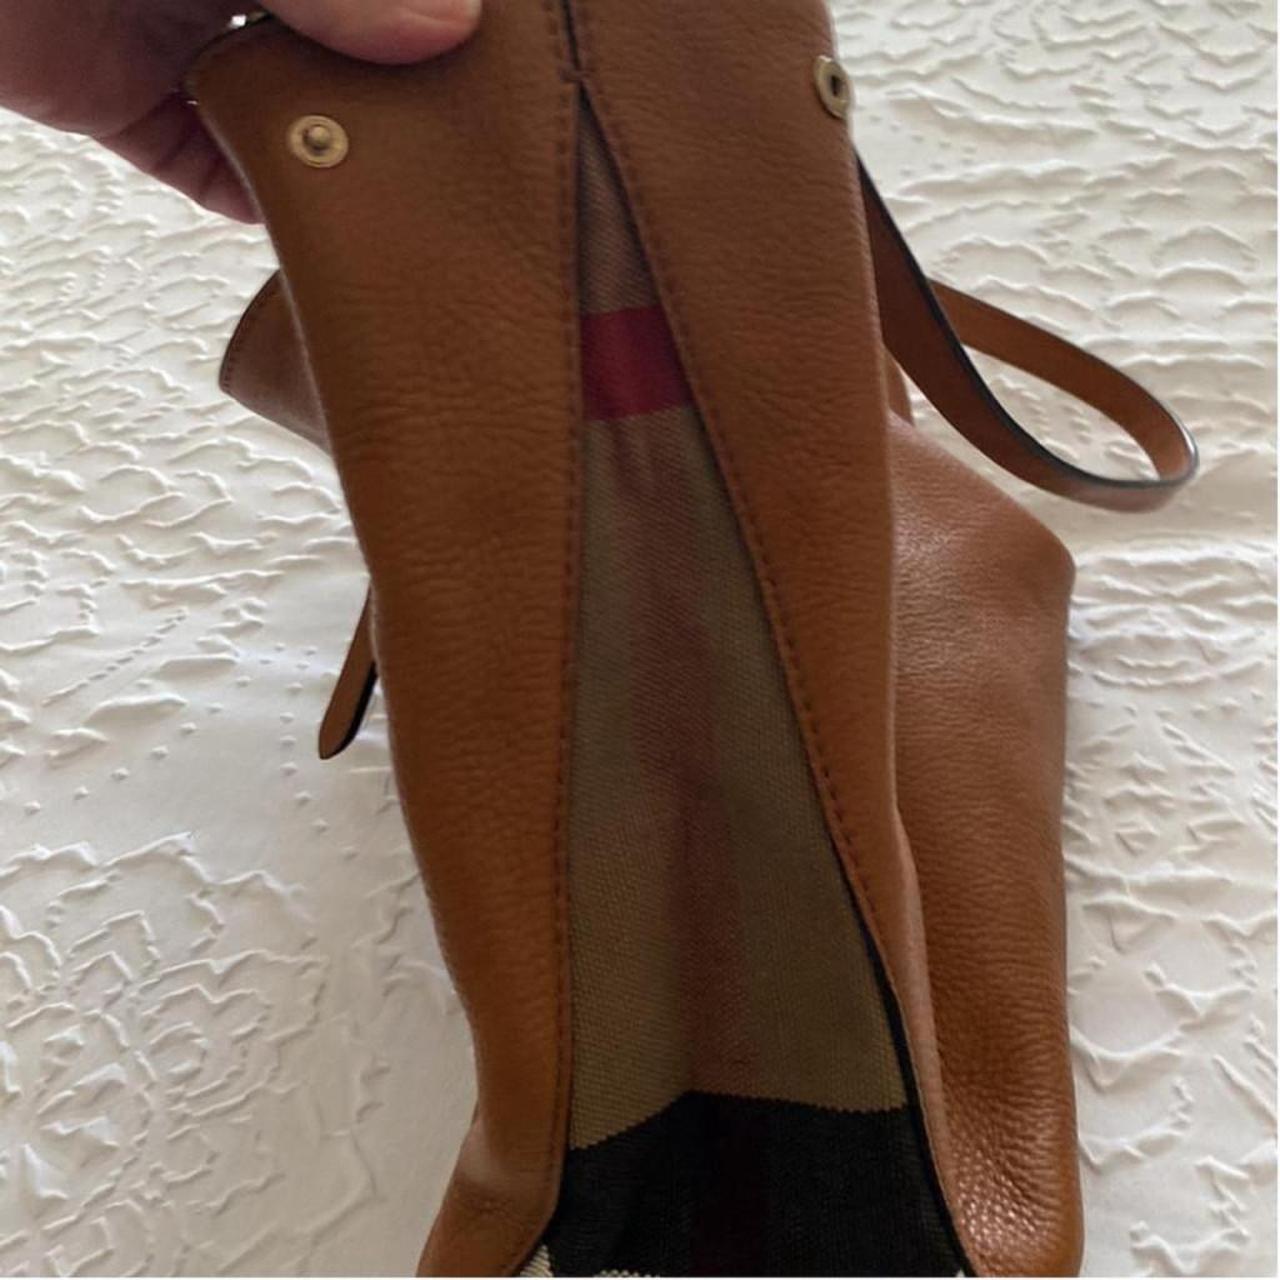 Authentic Burberry - Used | Burberry, Bags, Handbags